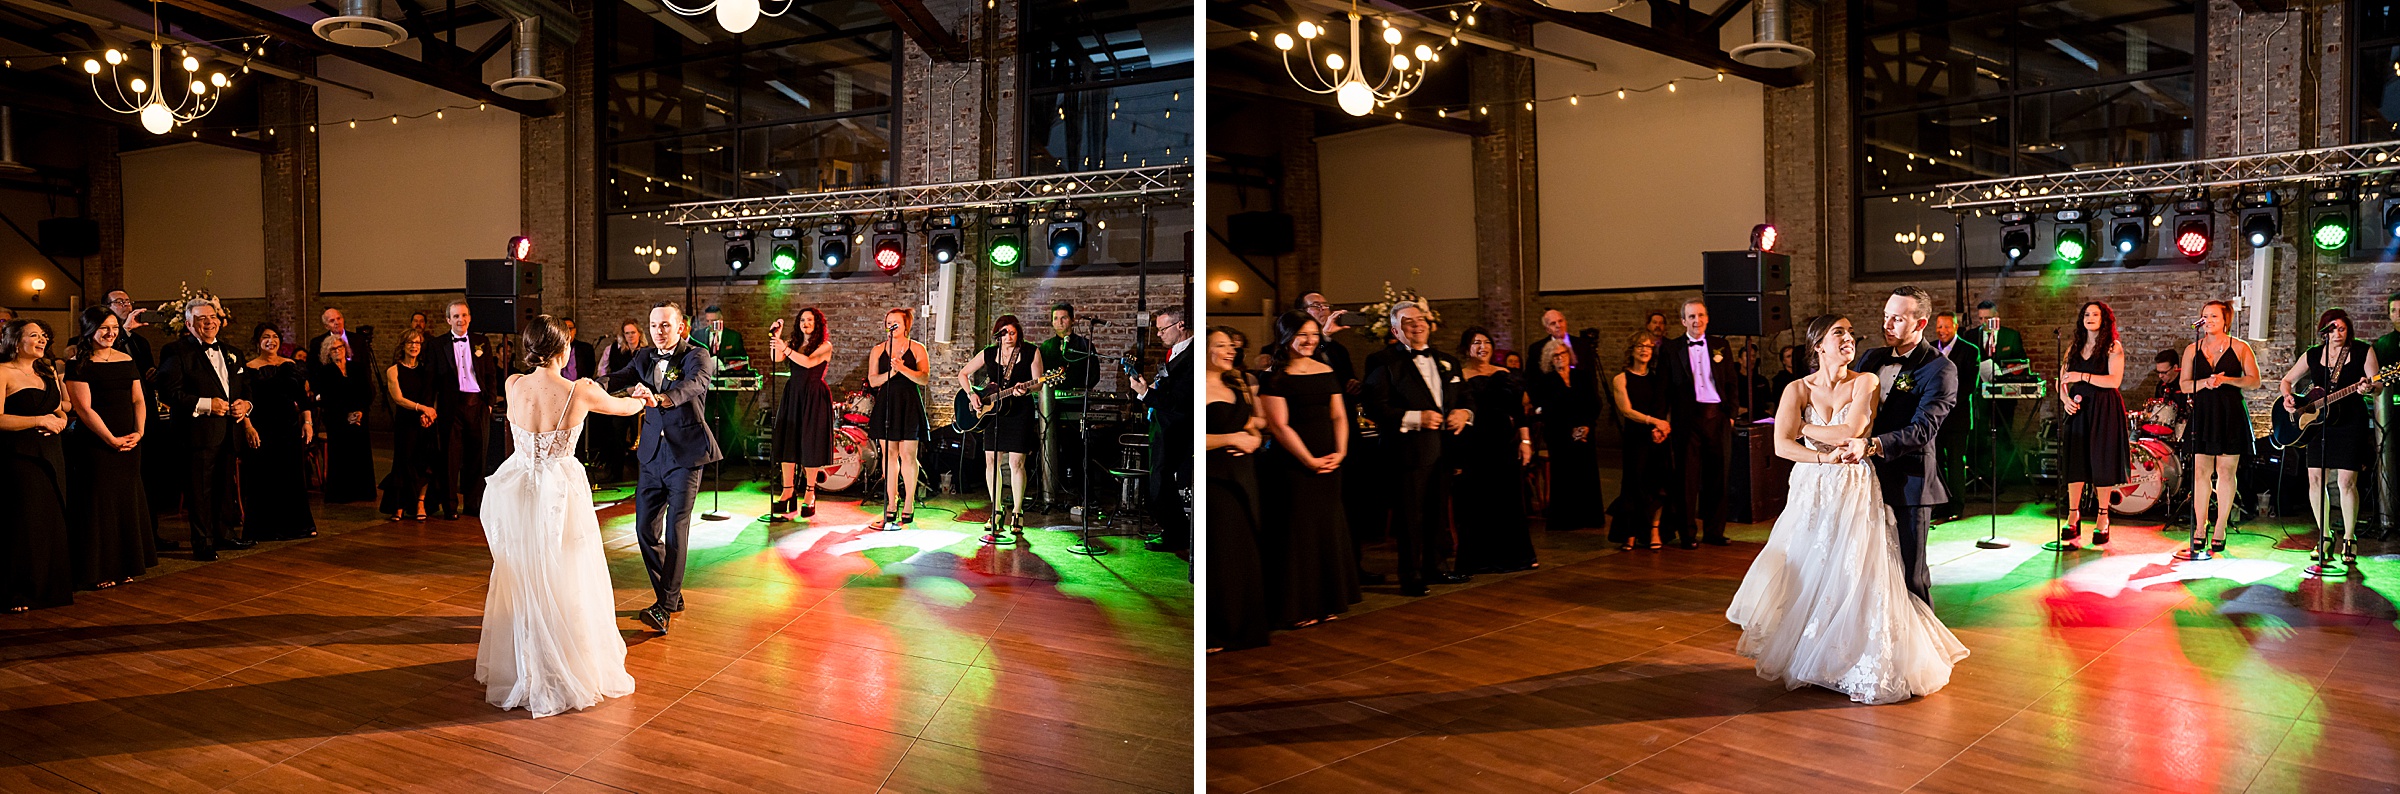 At a Lilah Events wedding, the bride and groom share their first dance together.